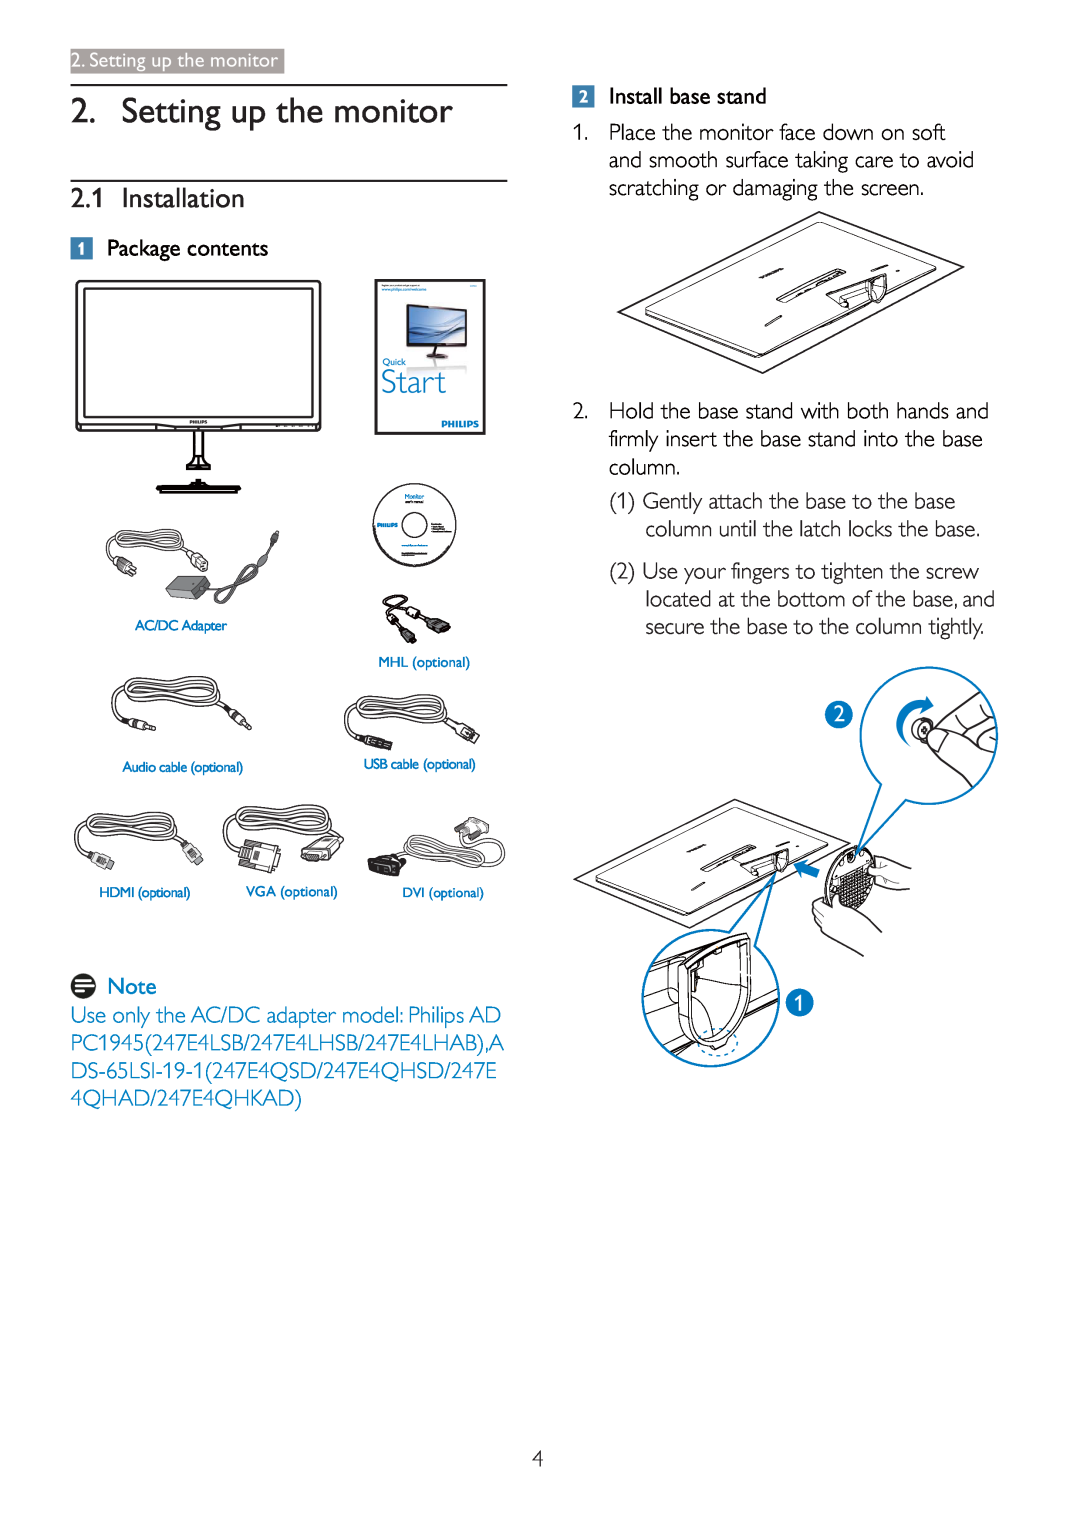 Philips 2.47E+06 user manual Setting up the monitor, Installation, Package contents, Install base stand 